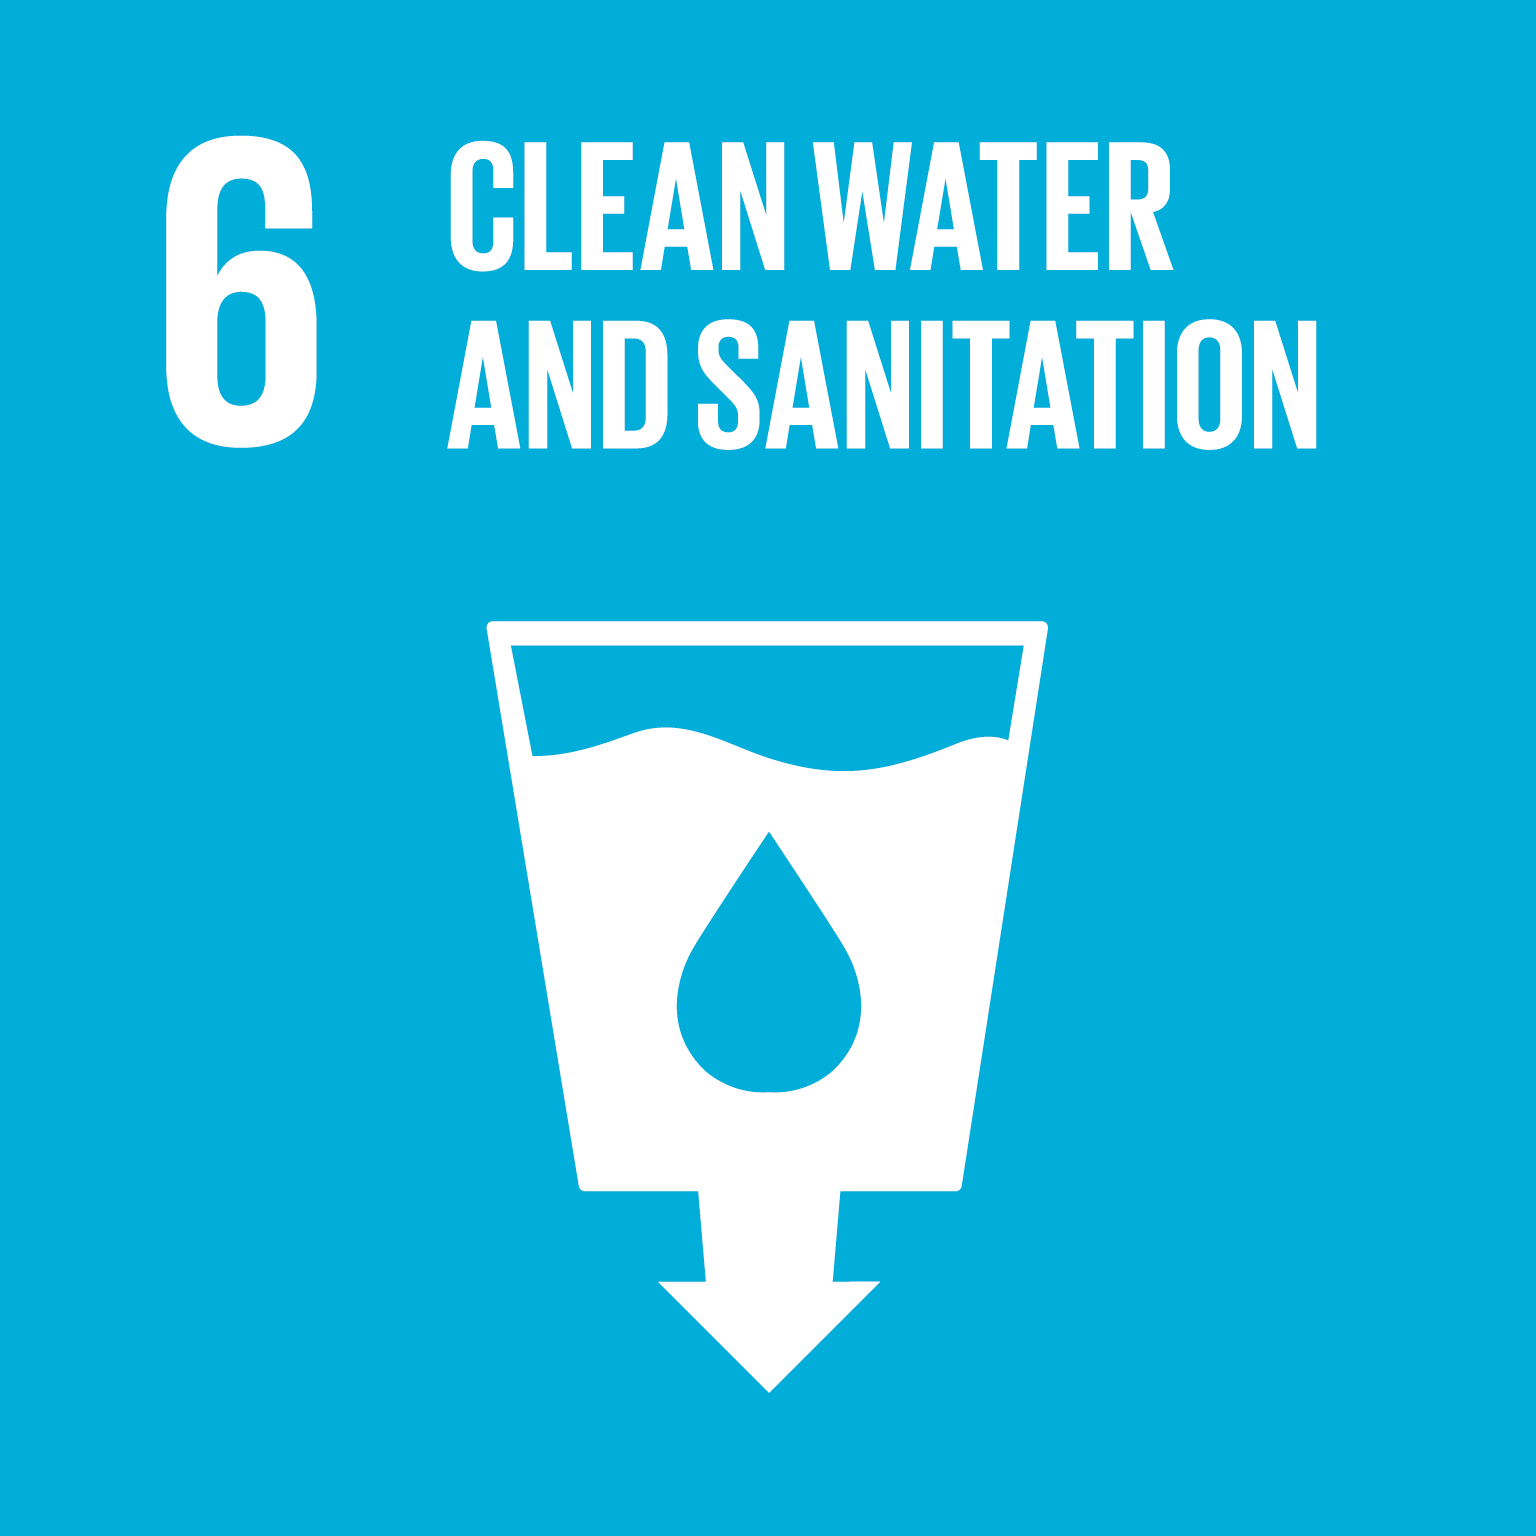 Sustainable Development Goal 6: Clean Water and Sanitization